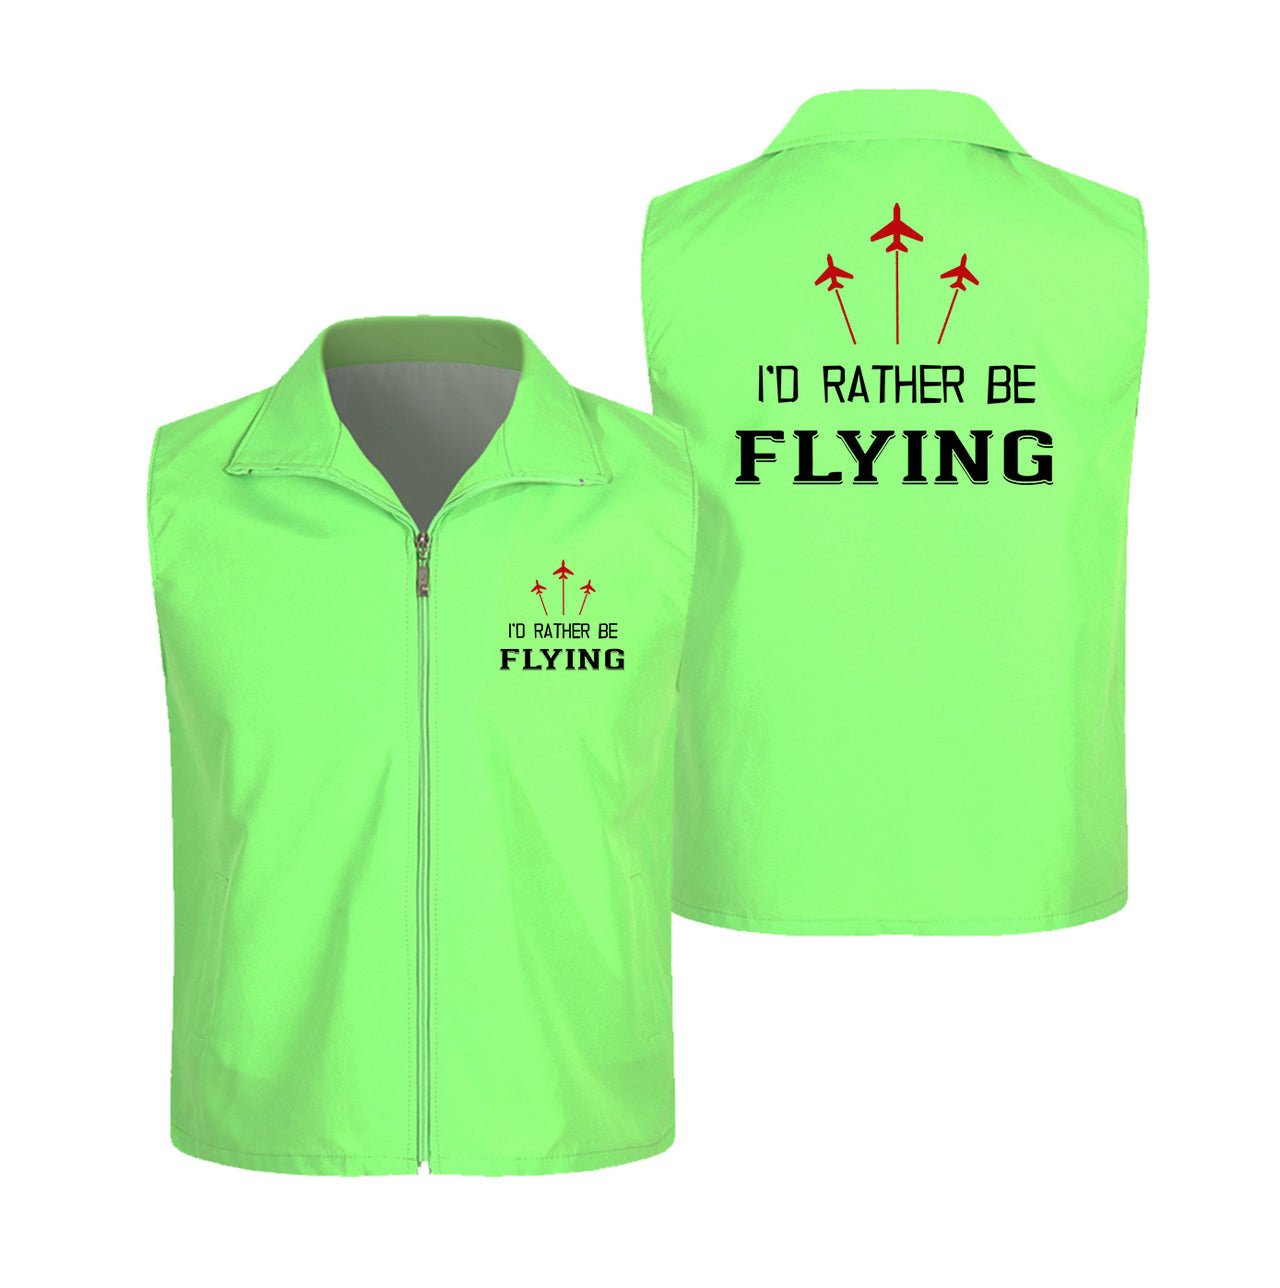 I'D Rather Be Flying Designed Thin Style Vests